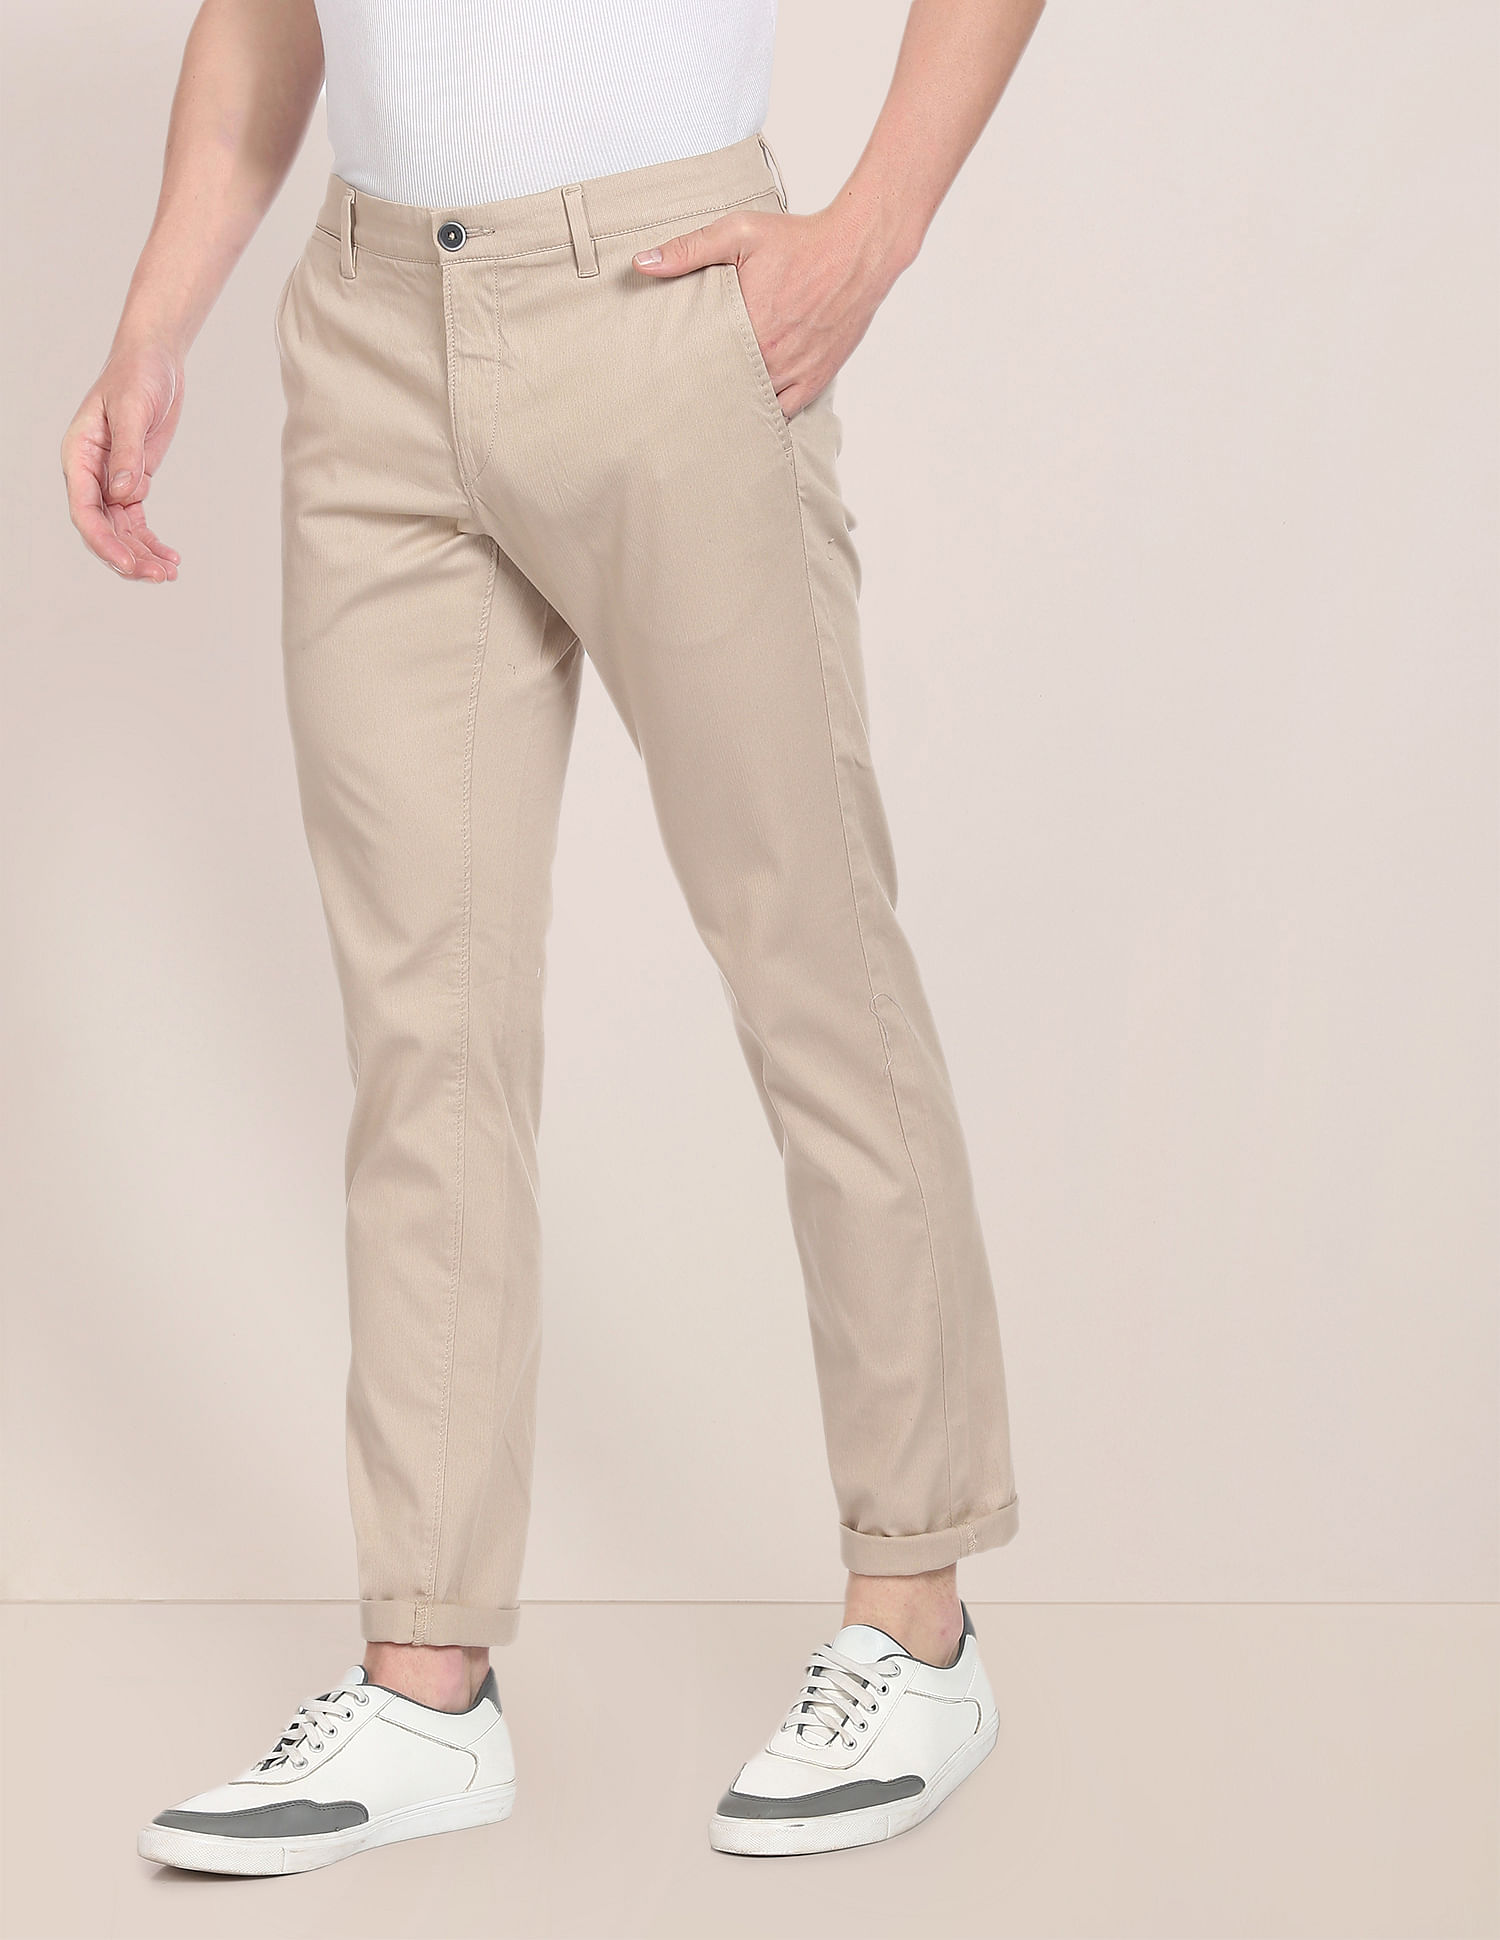 Buy online Mid Rise Flat Front Trousers Formal Trouser from Bottom Wear for  Men by Mancrew for 569 at 64 off  2023 Limeroadcom